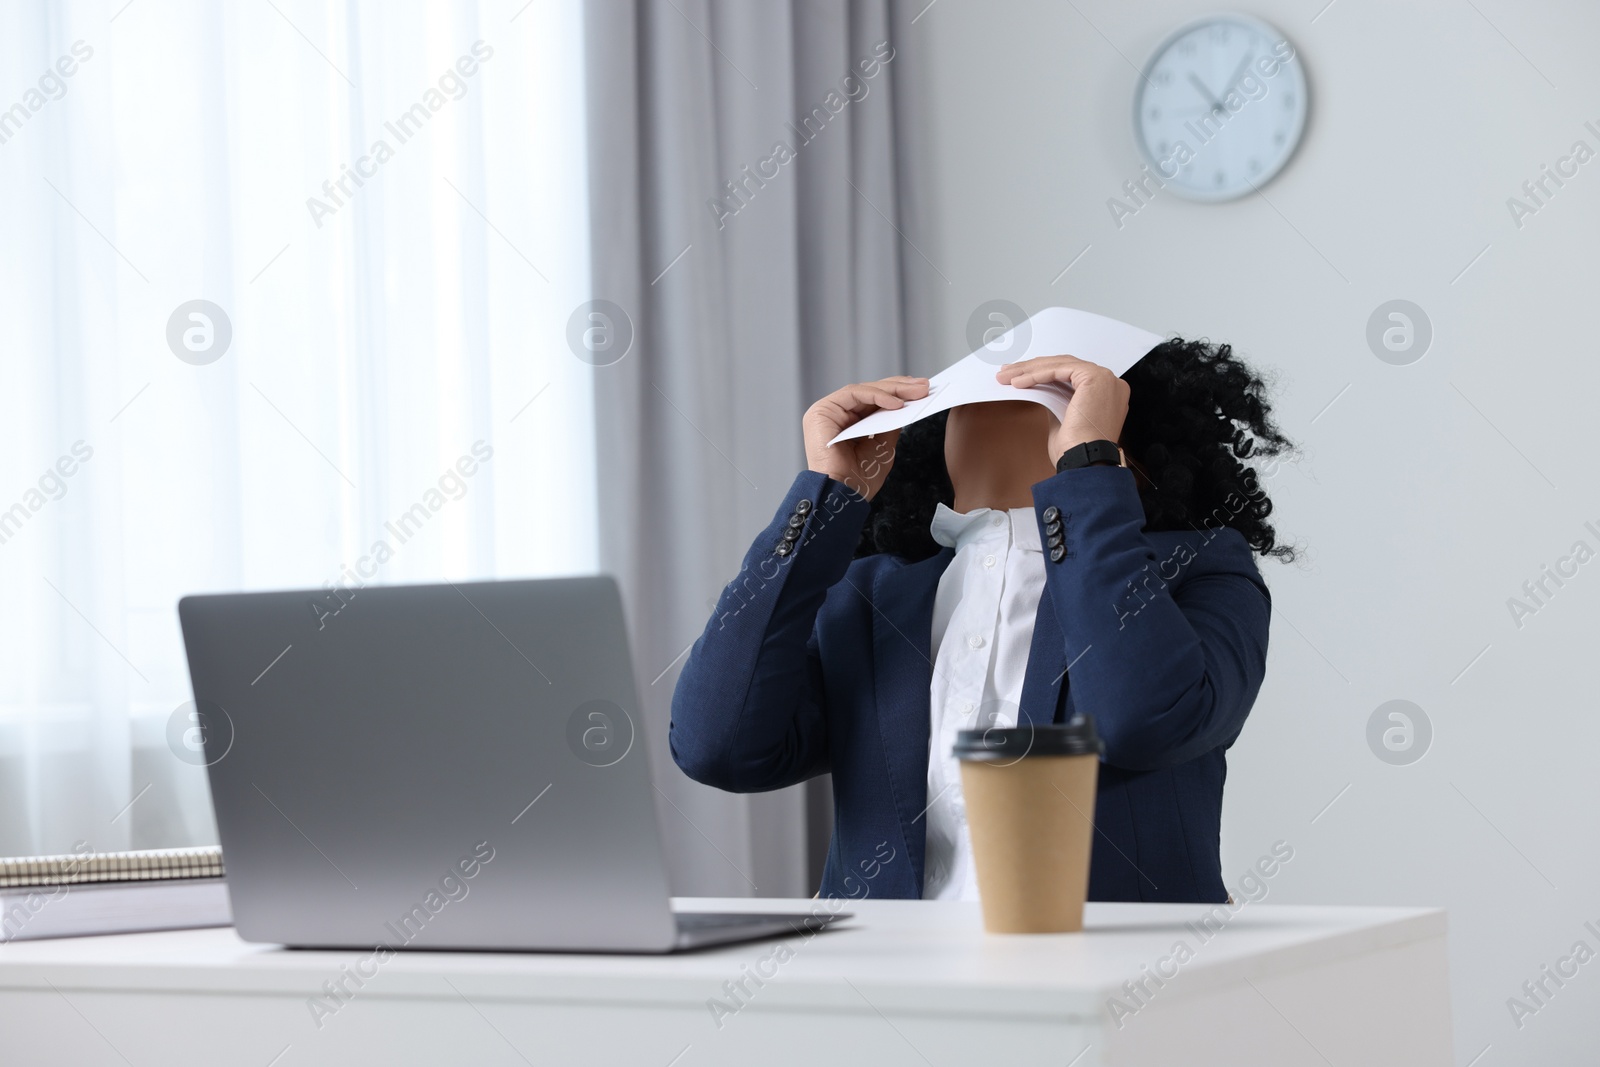 Photo of Deadline concept. Woman covering face with document in office